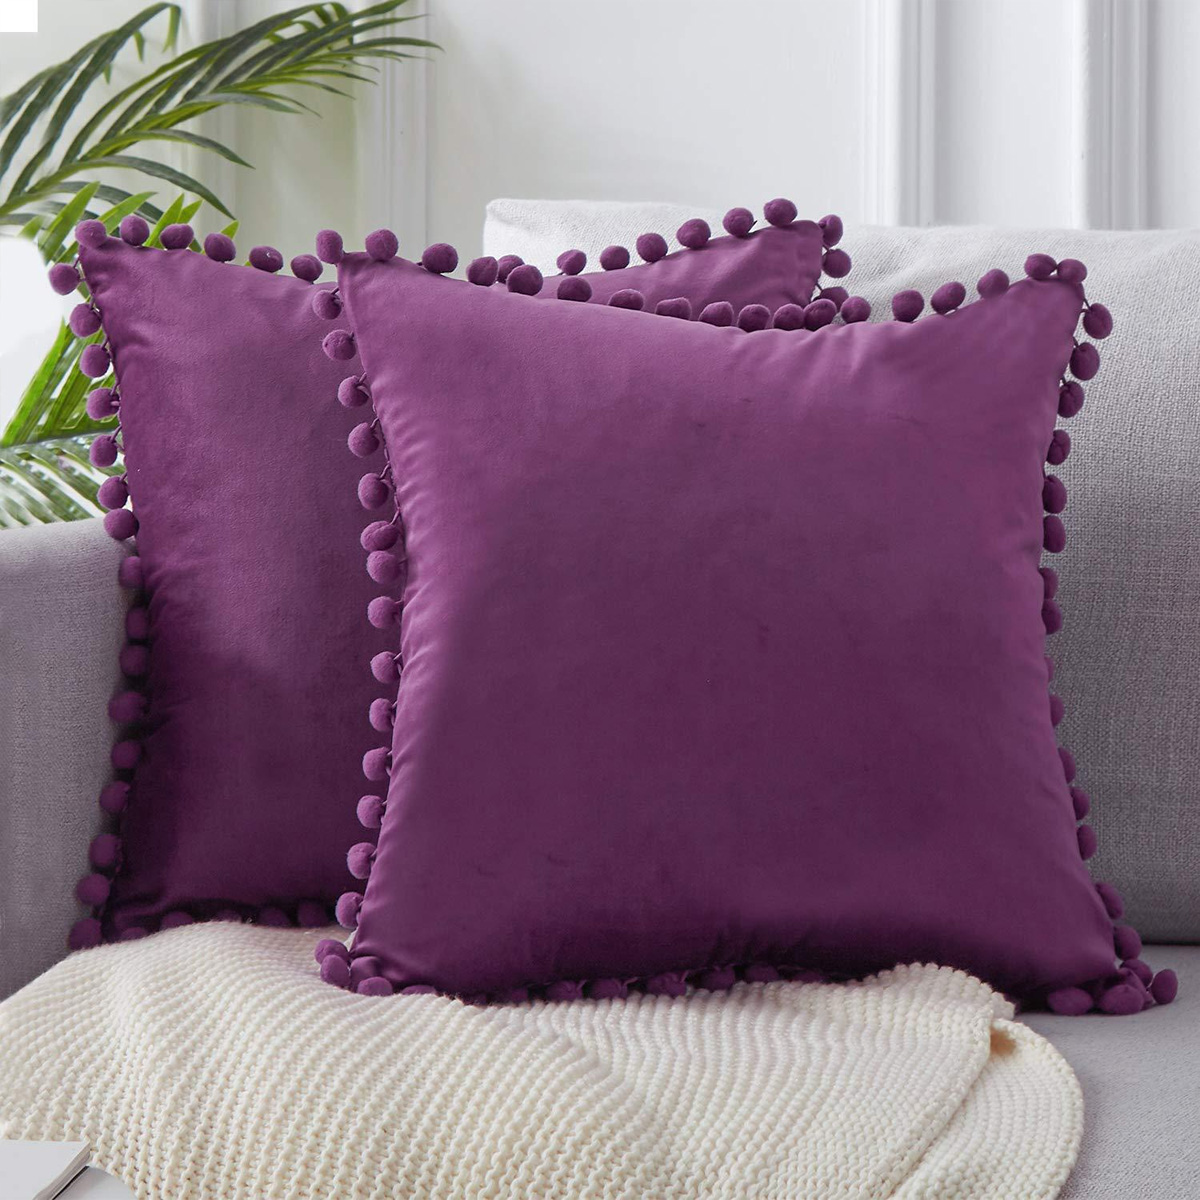 4545cm-Soft-Velvet-Pillow-Covers-Cute-Pom-Poms-Throw-Pillow-Covers-Square-Cushion-Case-for-Sofa-Couc-1779027-11